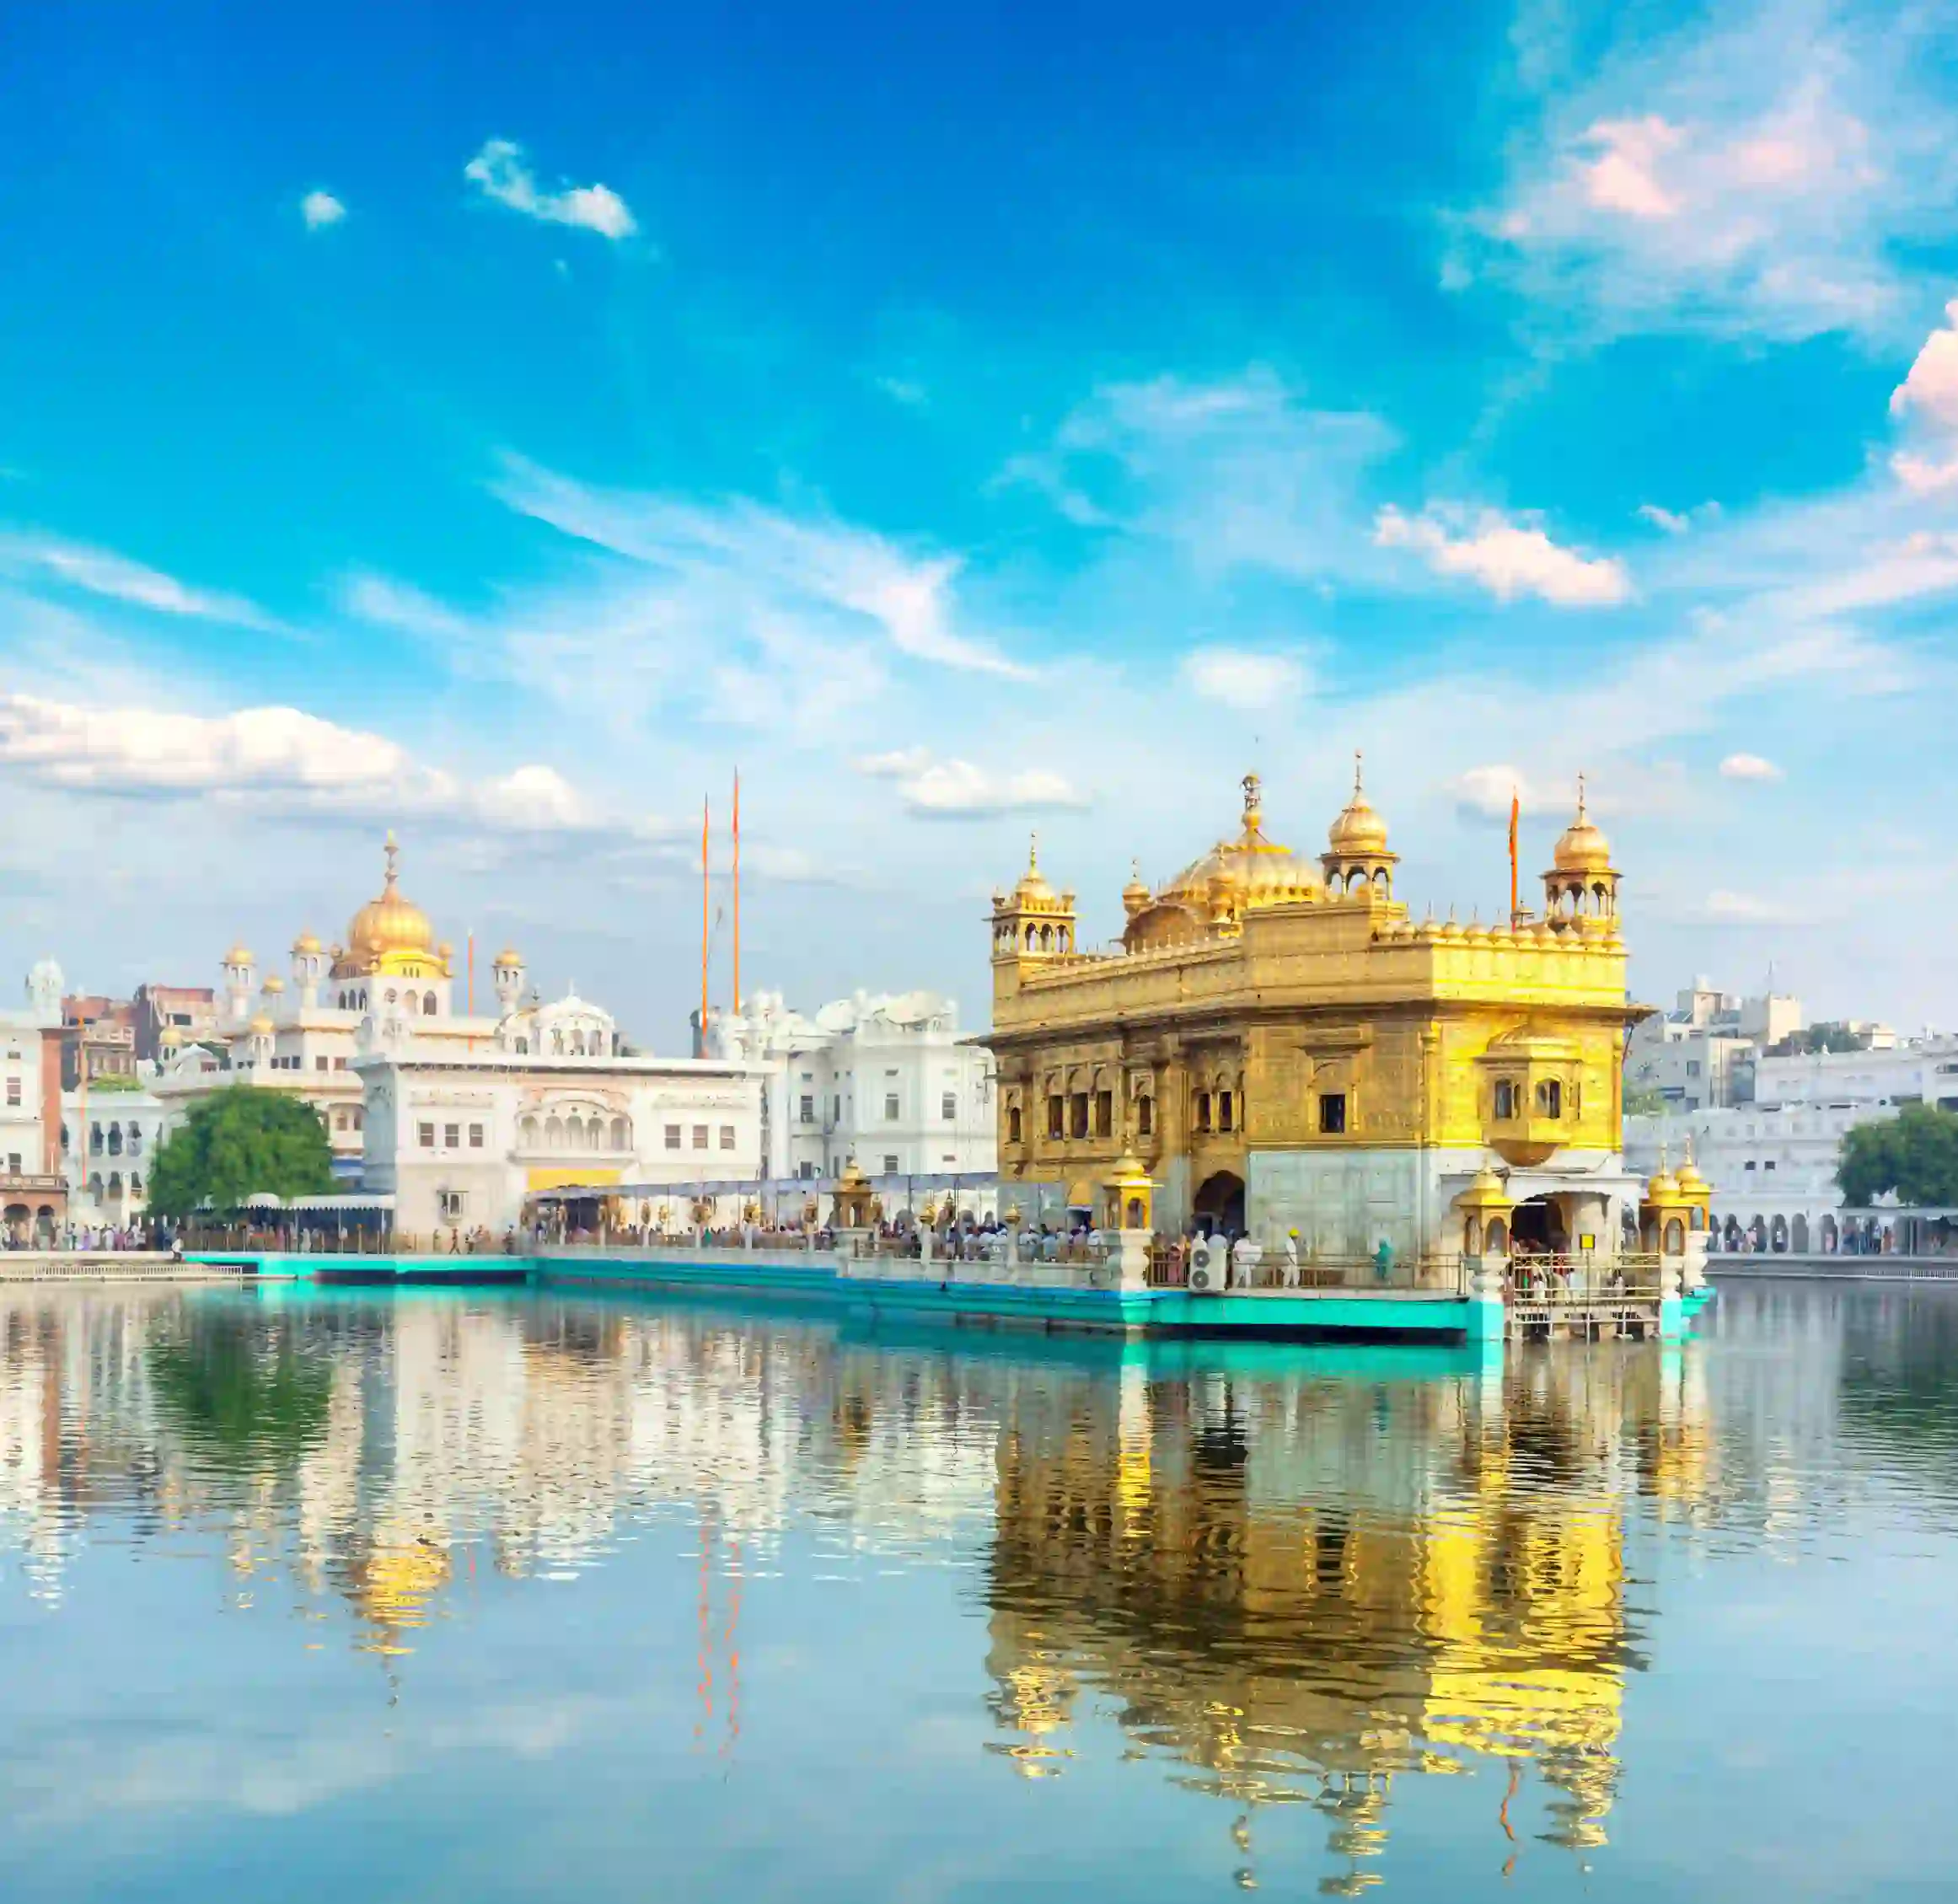 2 Days in Amritsar Trip: Budgets, Hotels, Food & Attractions 